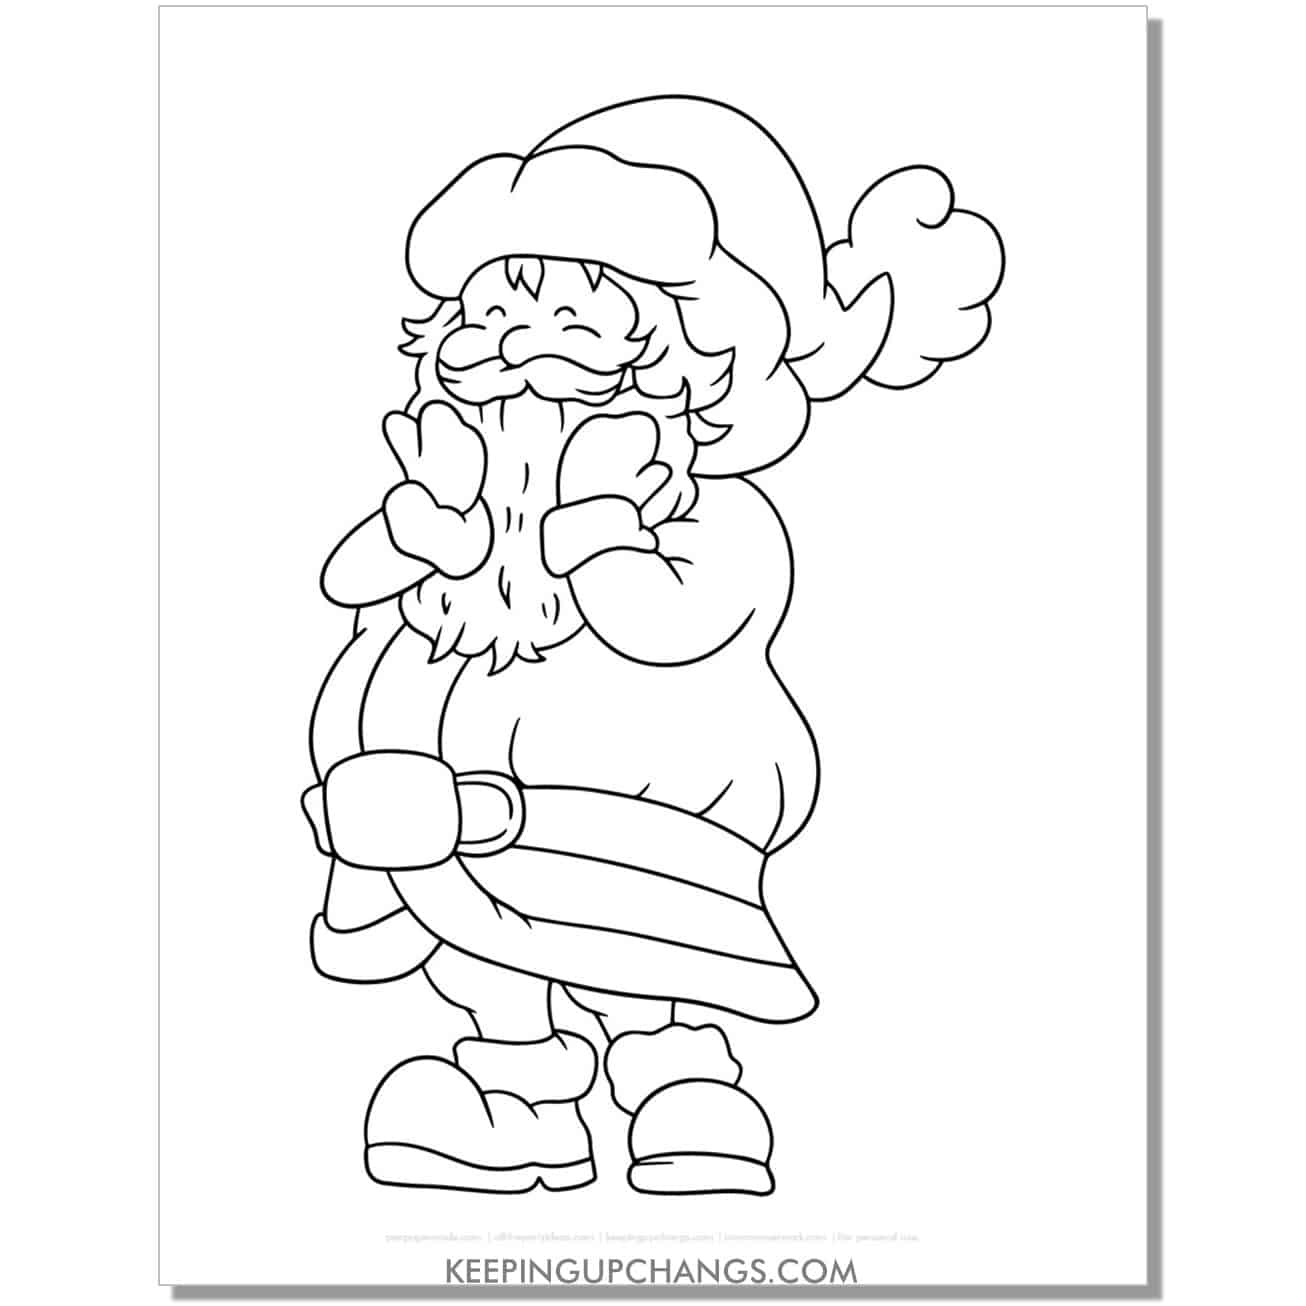 free happy santa outline, black and white cut out template.